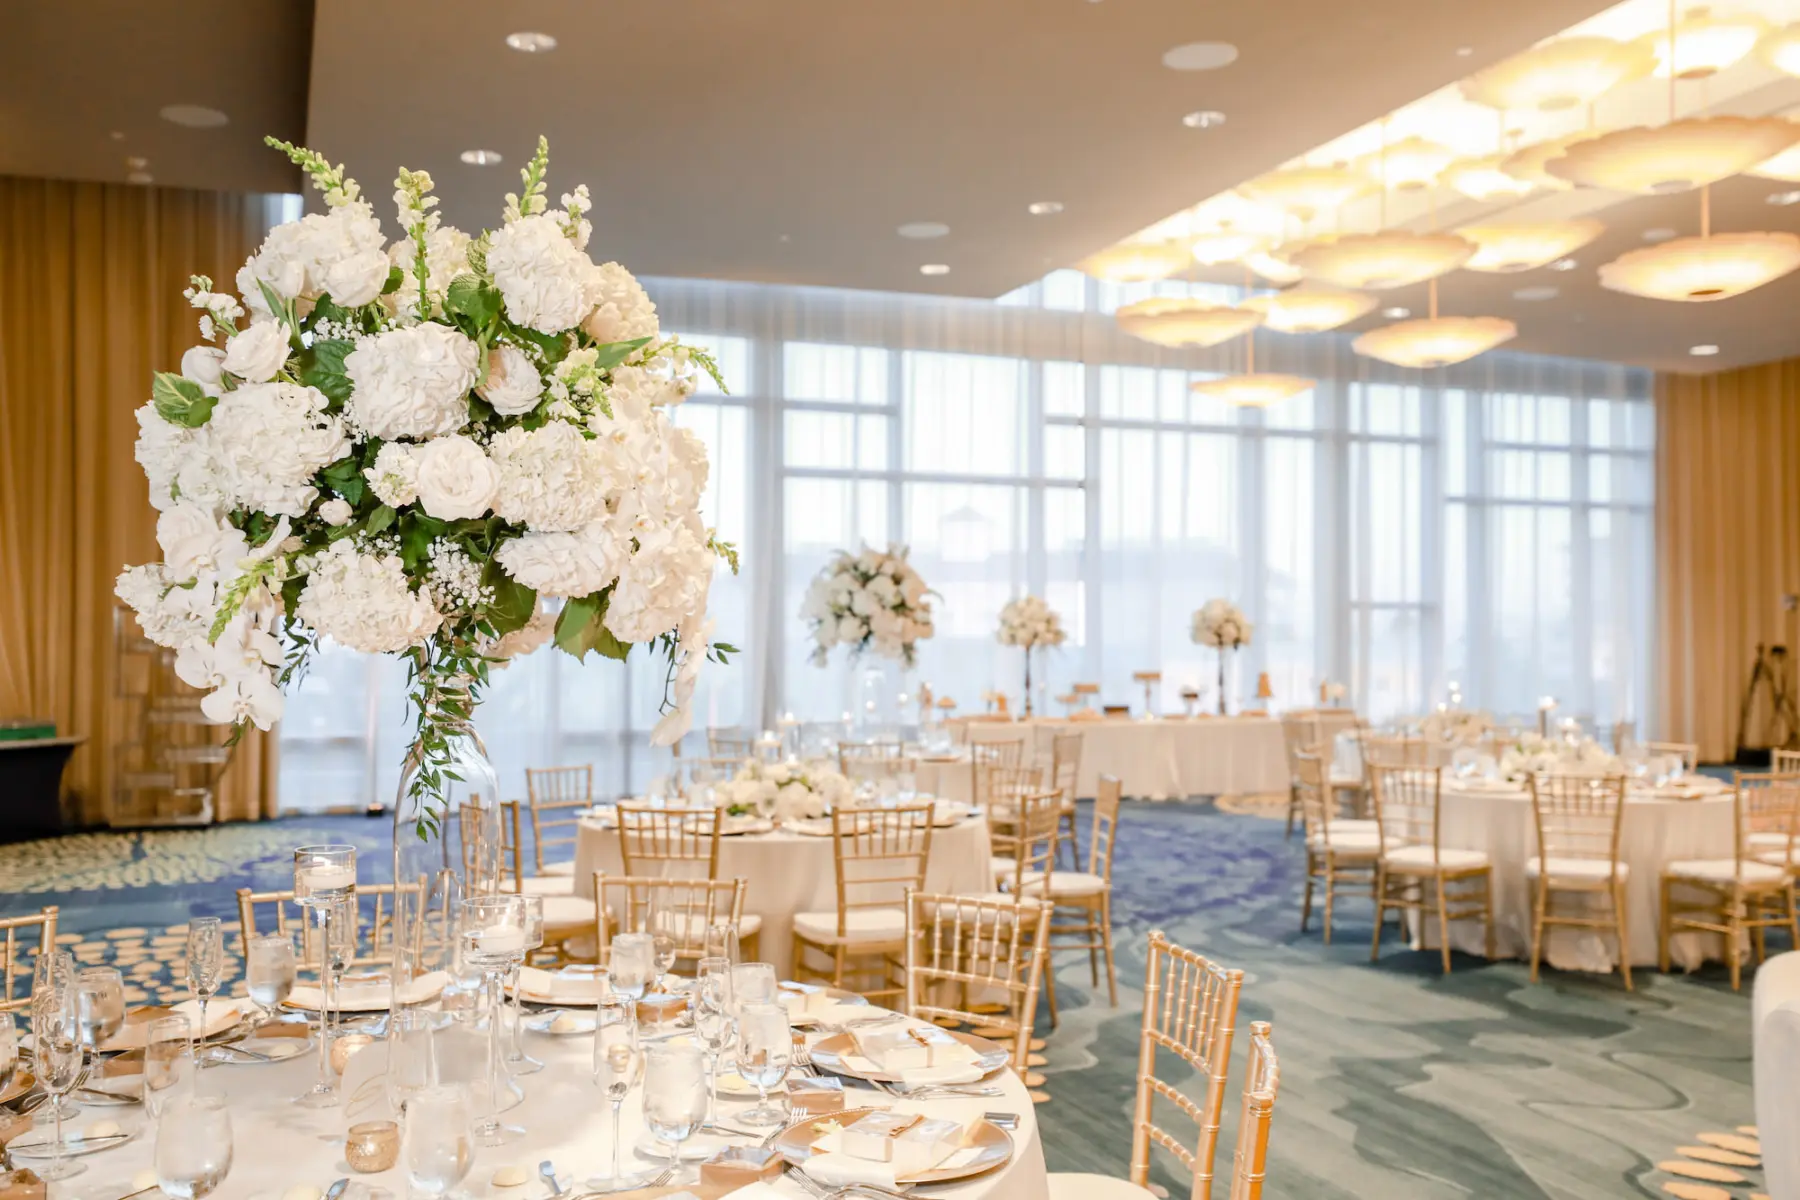 Elegant Monochromatic White and Gold Ballroom Wedding Reception Ideas | White Rose, Hydrangea, and Floating Candle Centerpiece Decor Inspiration | Gold Chiavari Chairs | Tampa Bay Outside Of The Box Rentals | Clearwater Kate Ryan Event Rentals